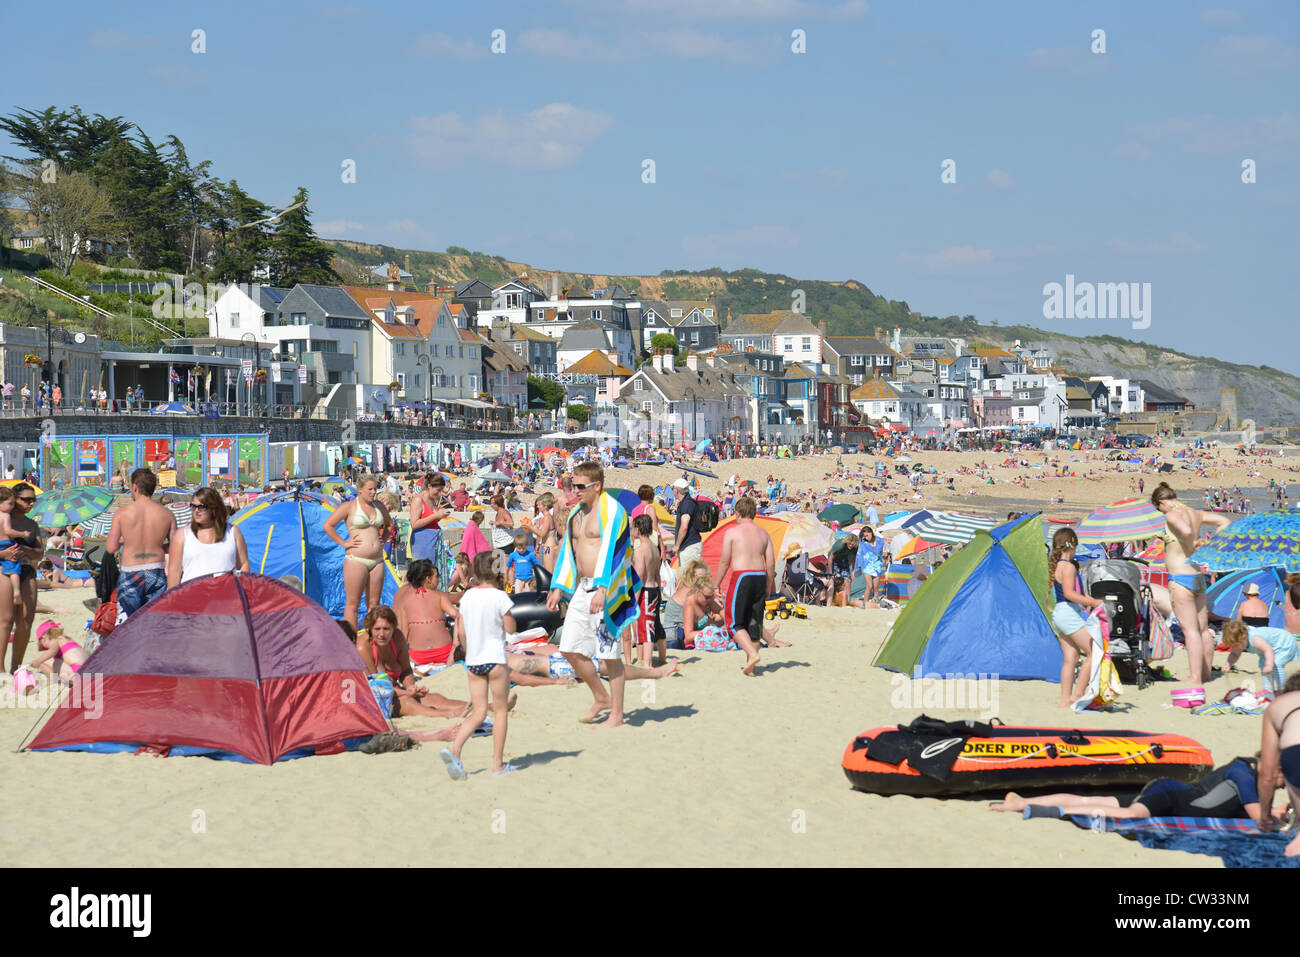 Beach and seafront view, Lyme Regis, Dorset, England, United Kingdom Stock Photo